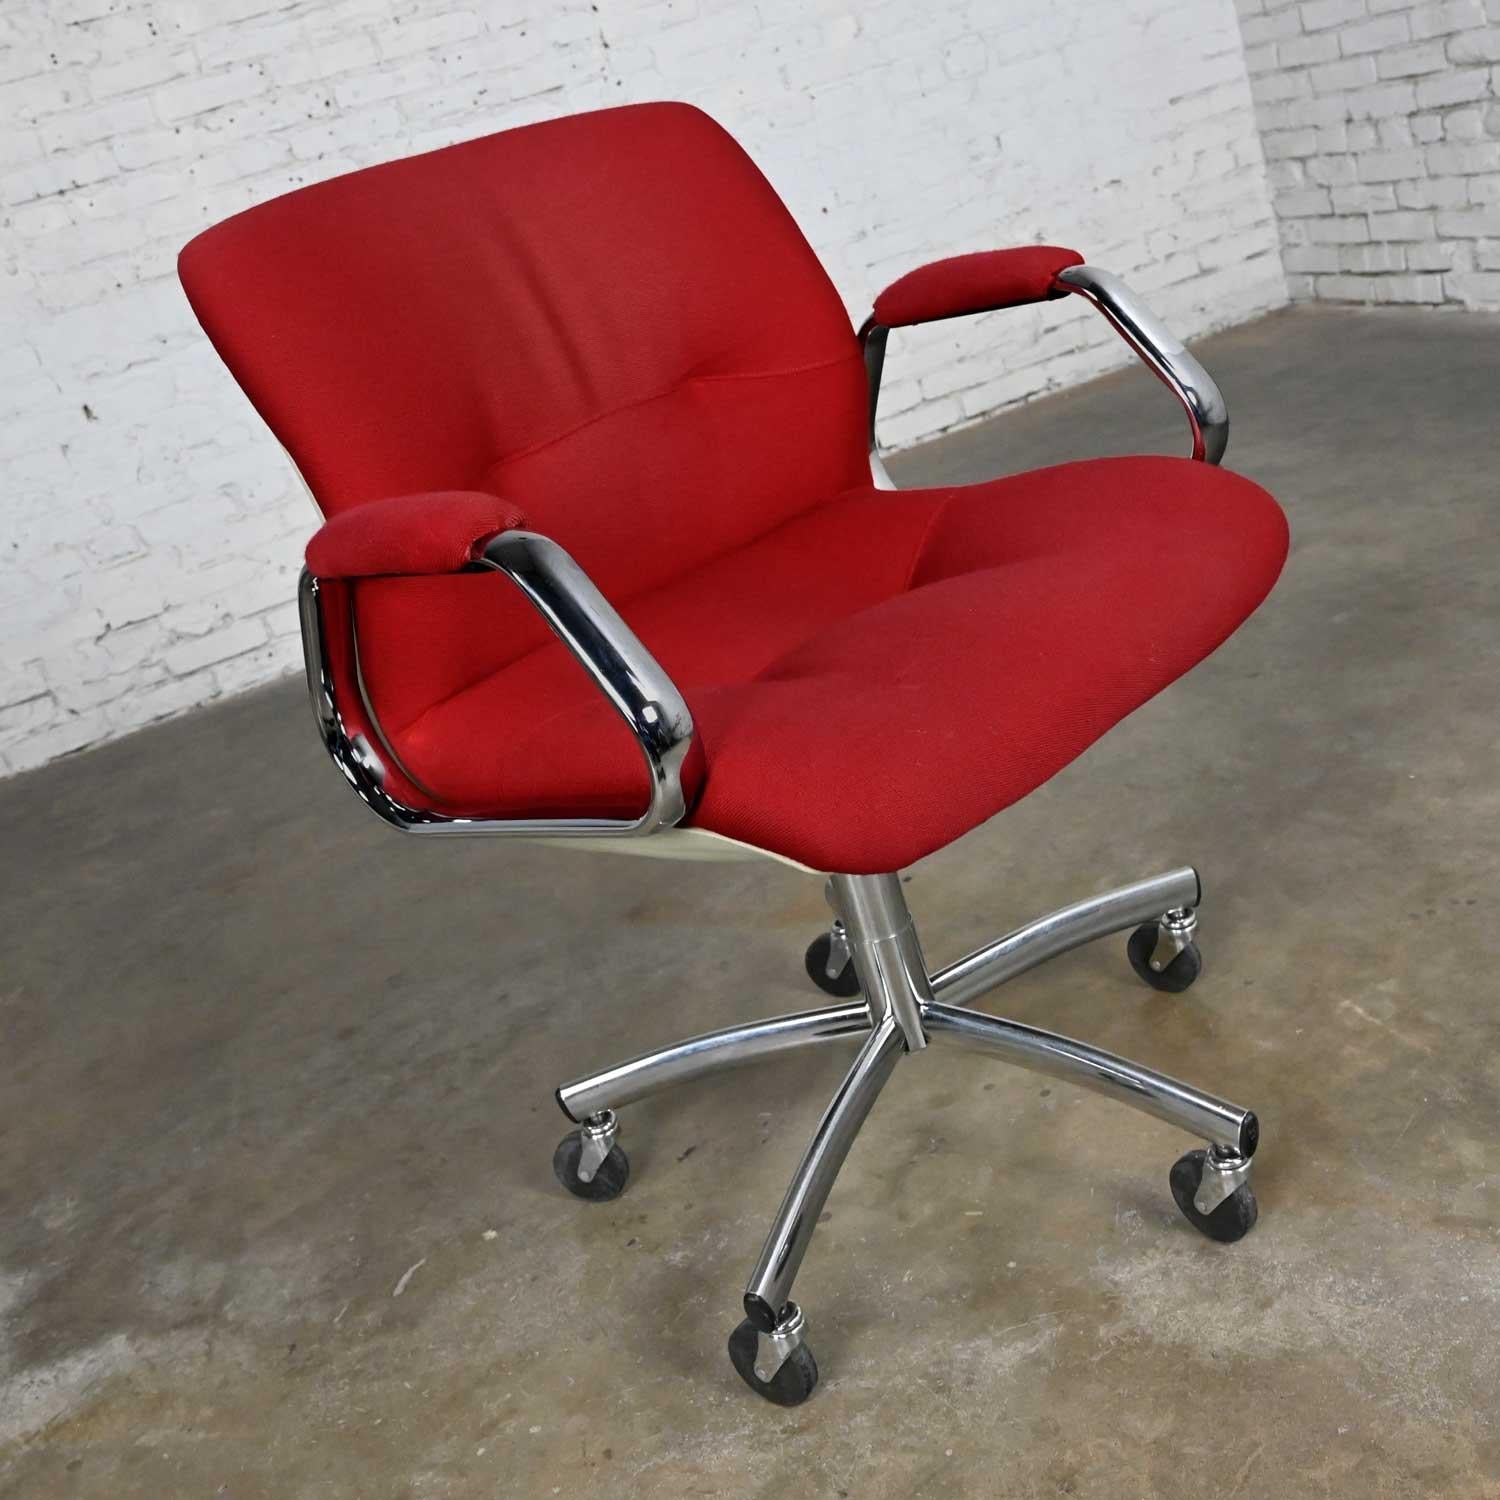 American Modern Steelcase Chrome & Red Swivel Rolling Chair #454 Style Charles Pollock For Sale